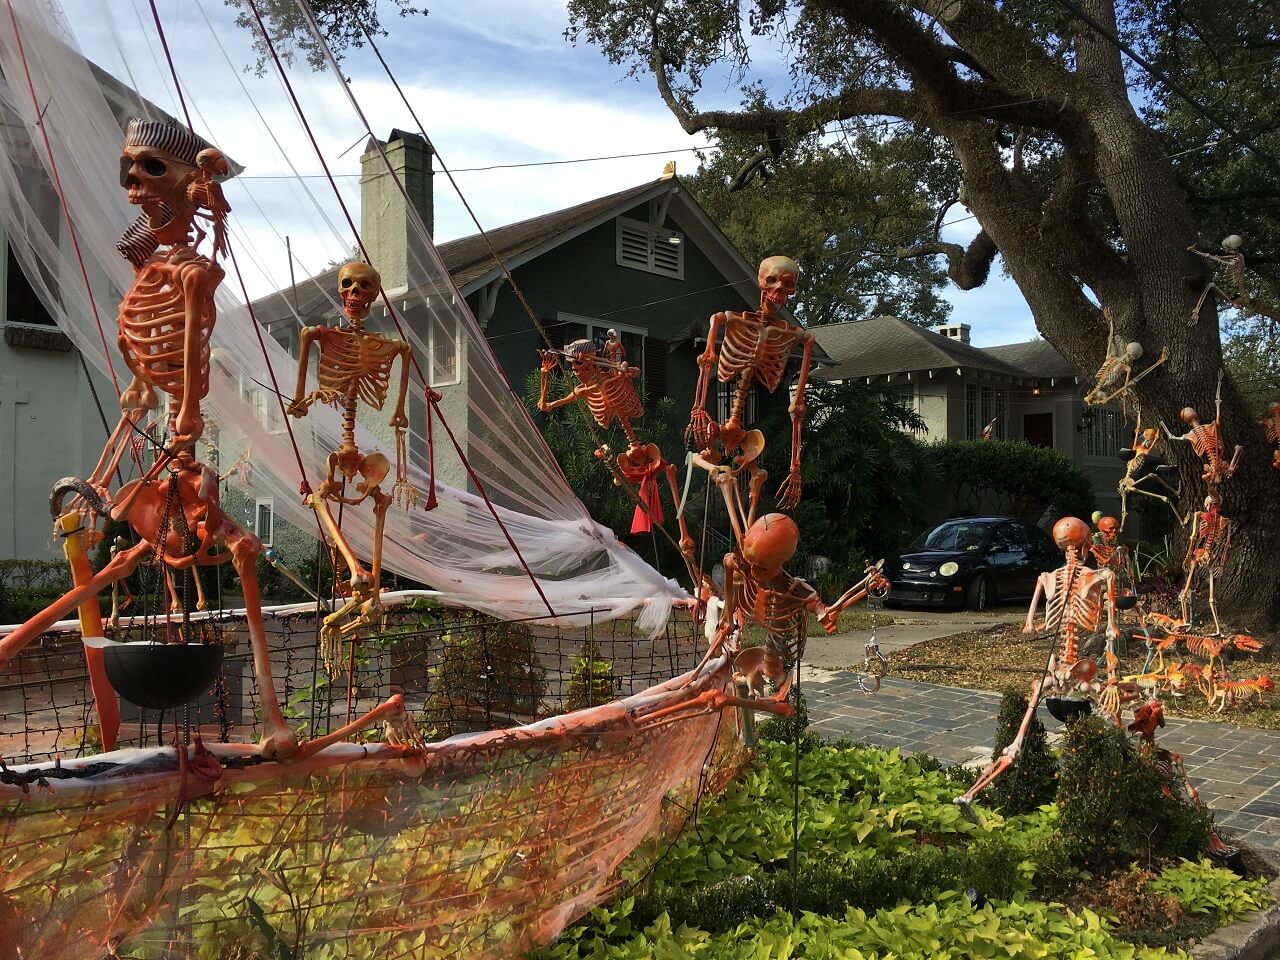 Skeleton decorations on a New Orleans lawn